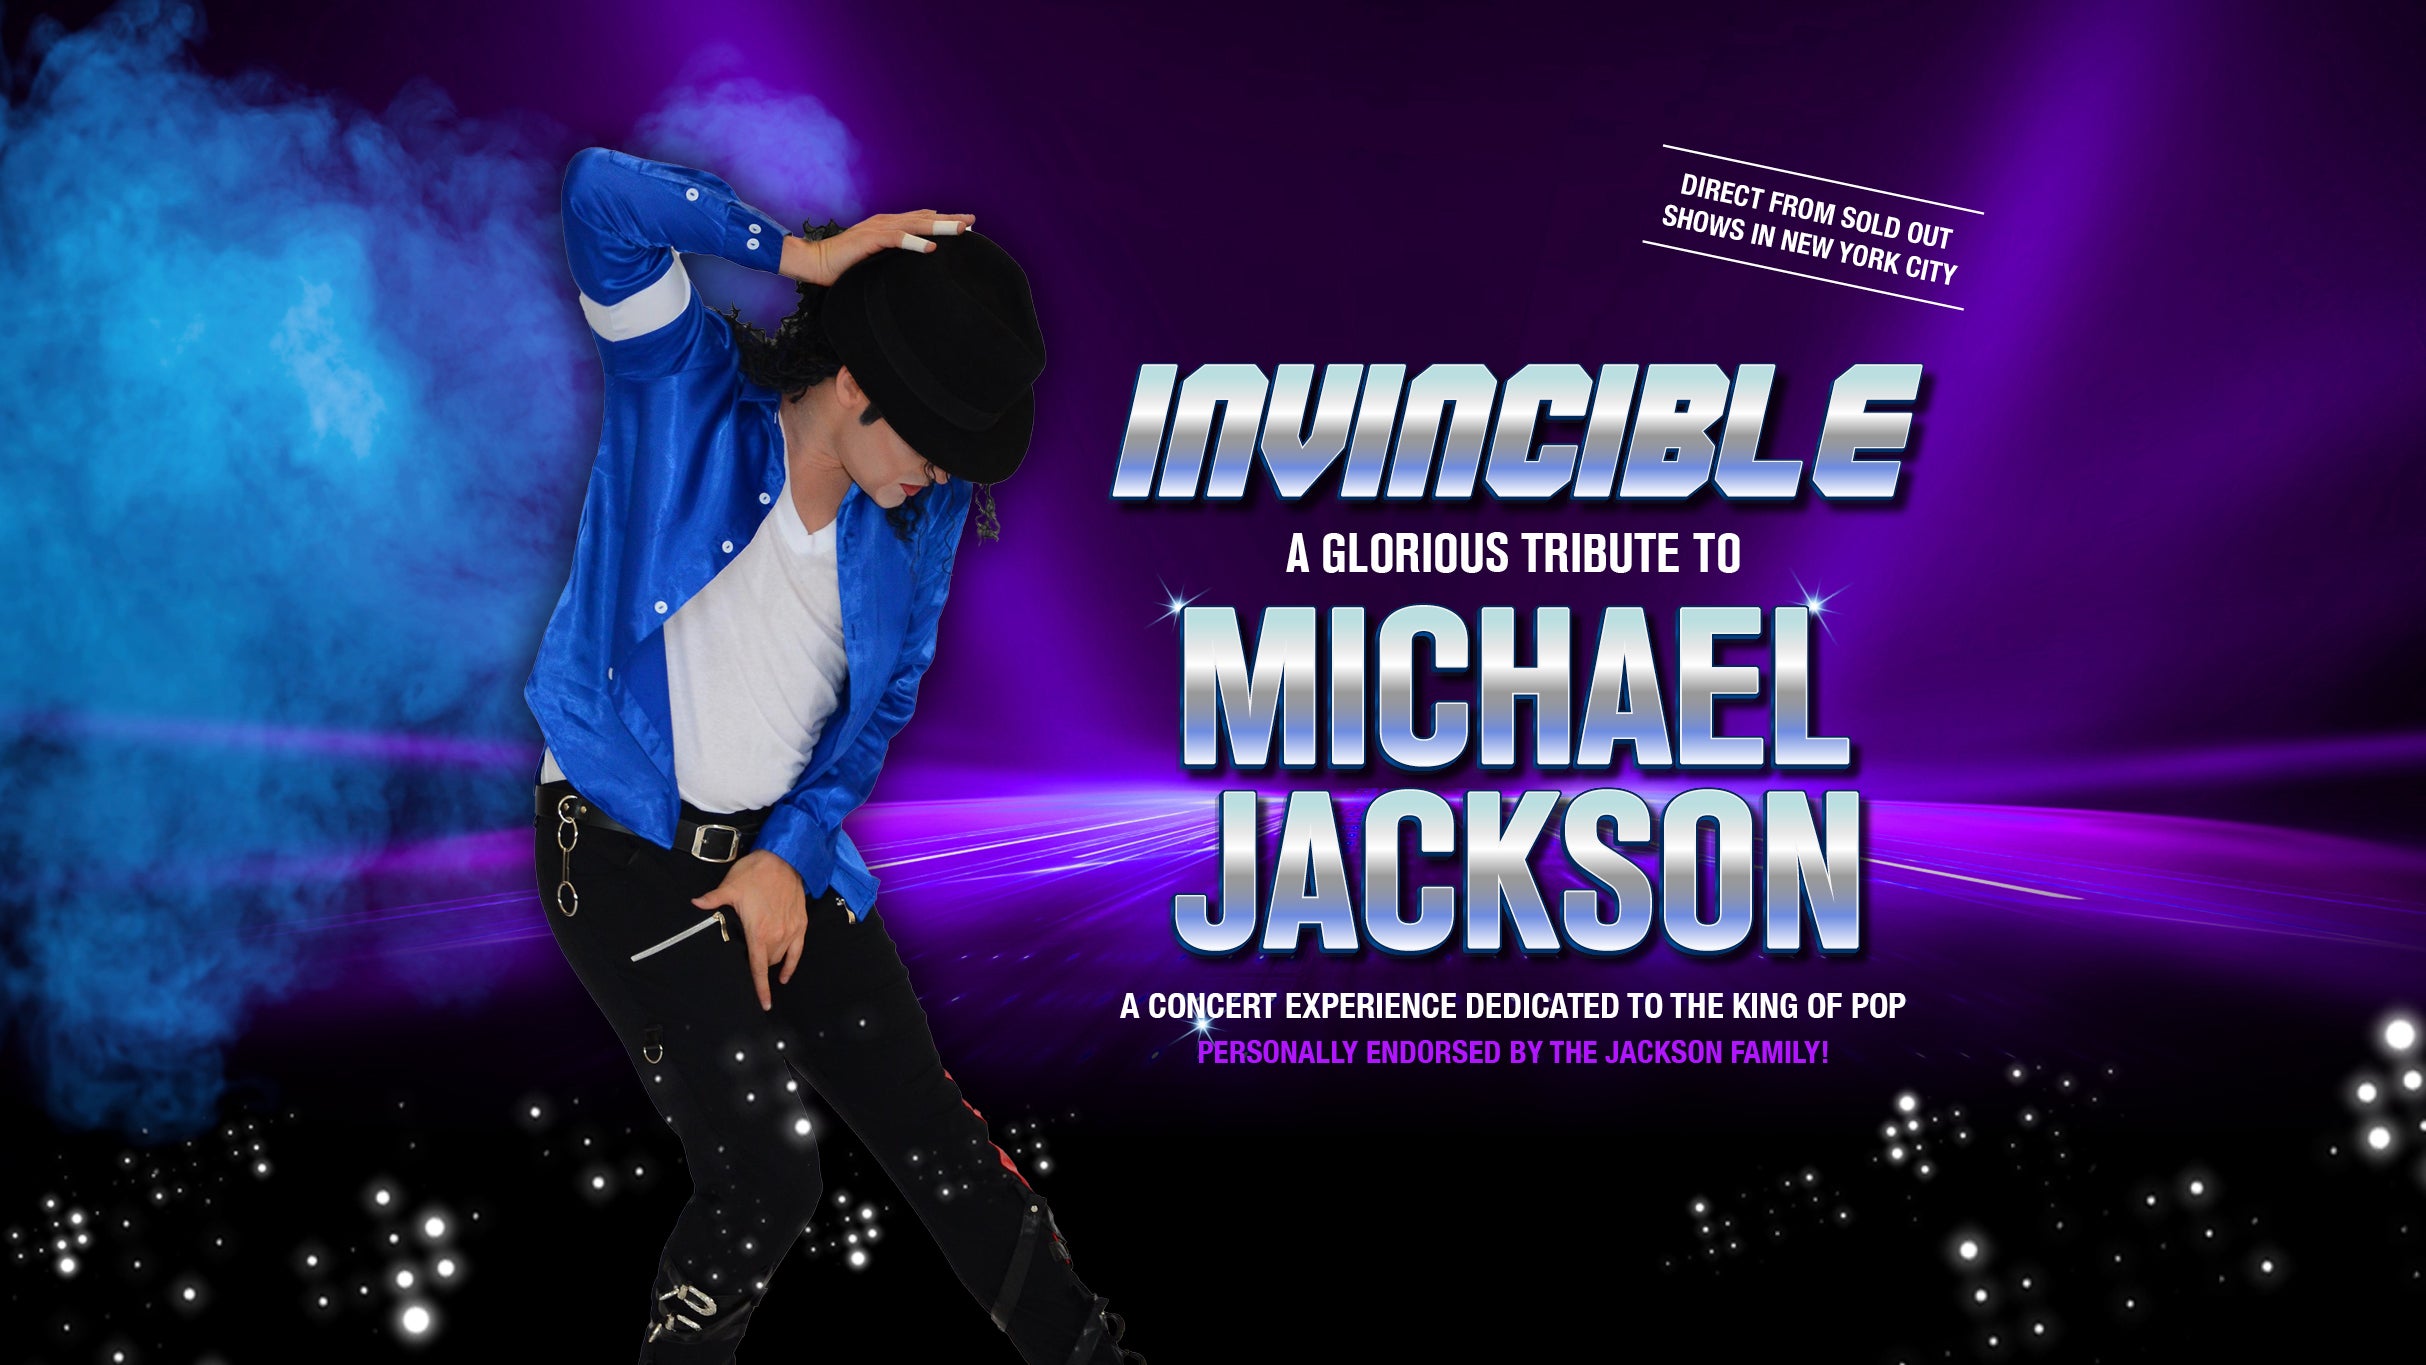 INVINCIBLE A Glorious Tribute to Michael Jackson